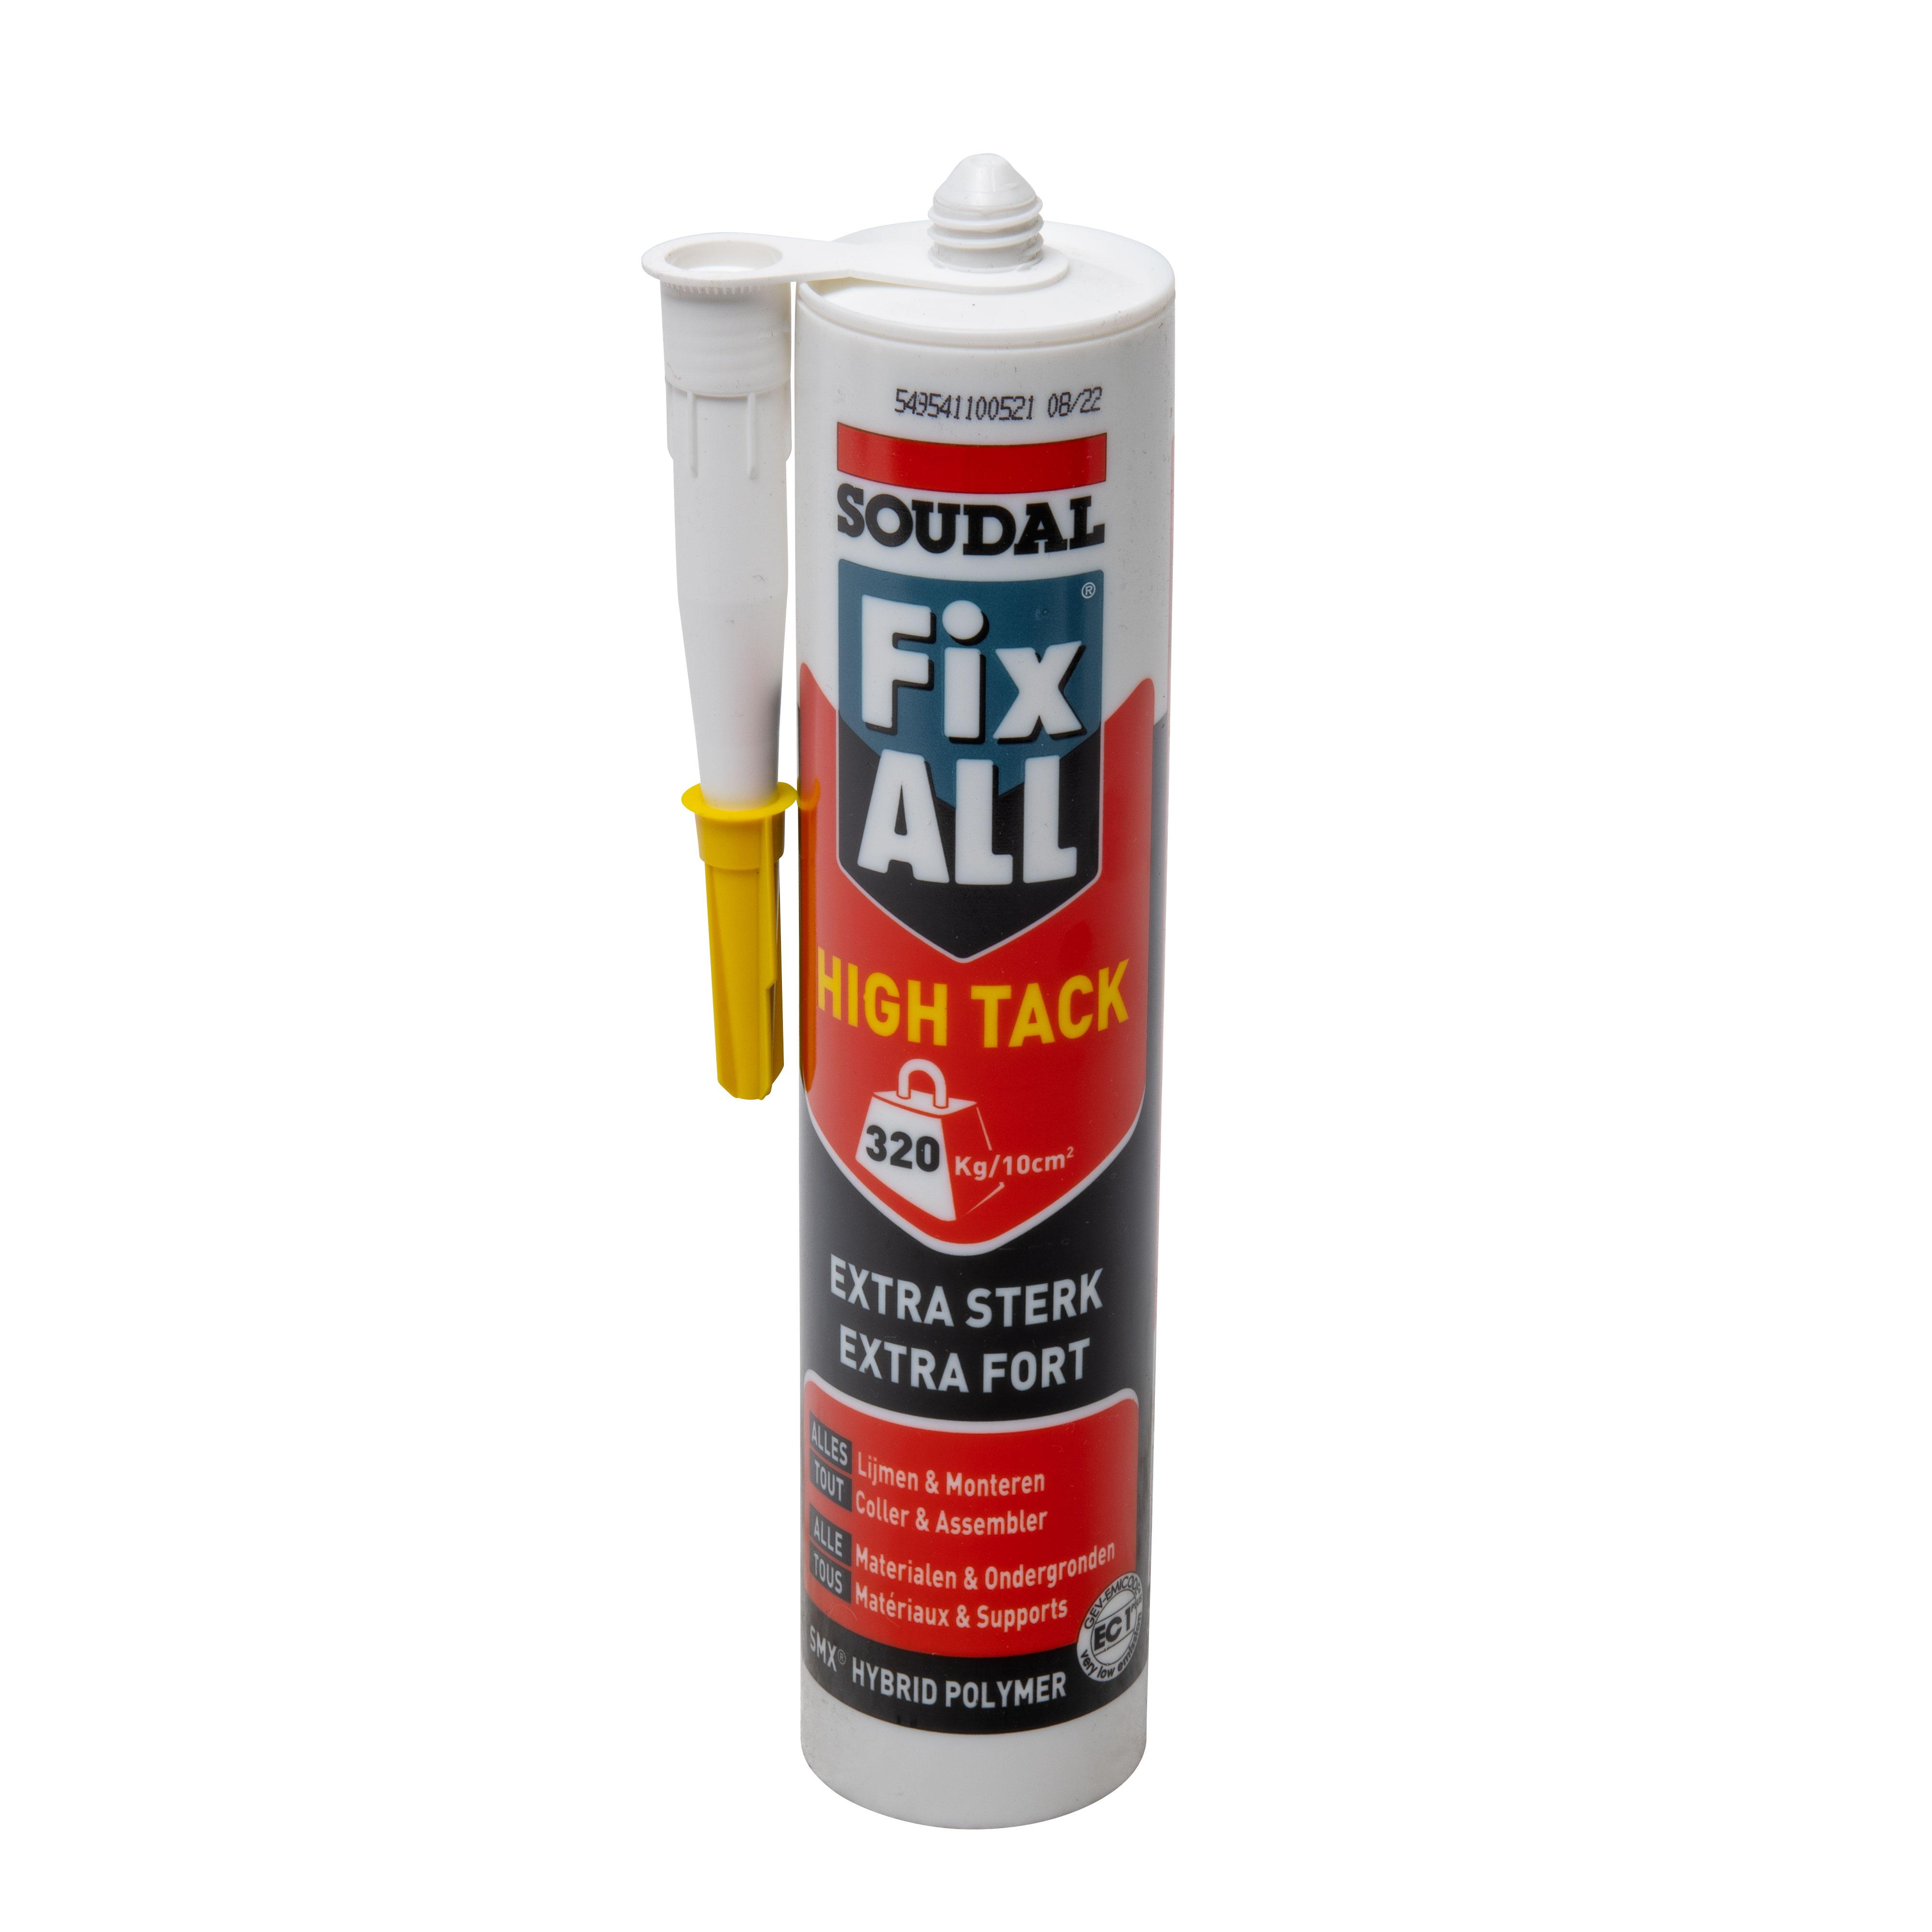 Cartouche colle extra forte Fix All HighTack 290ml pas cher 